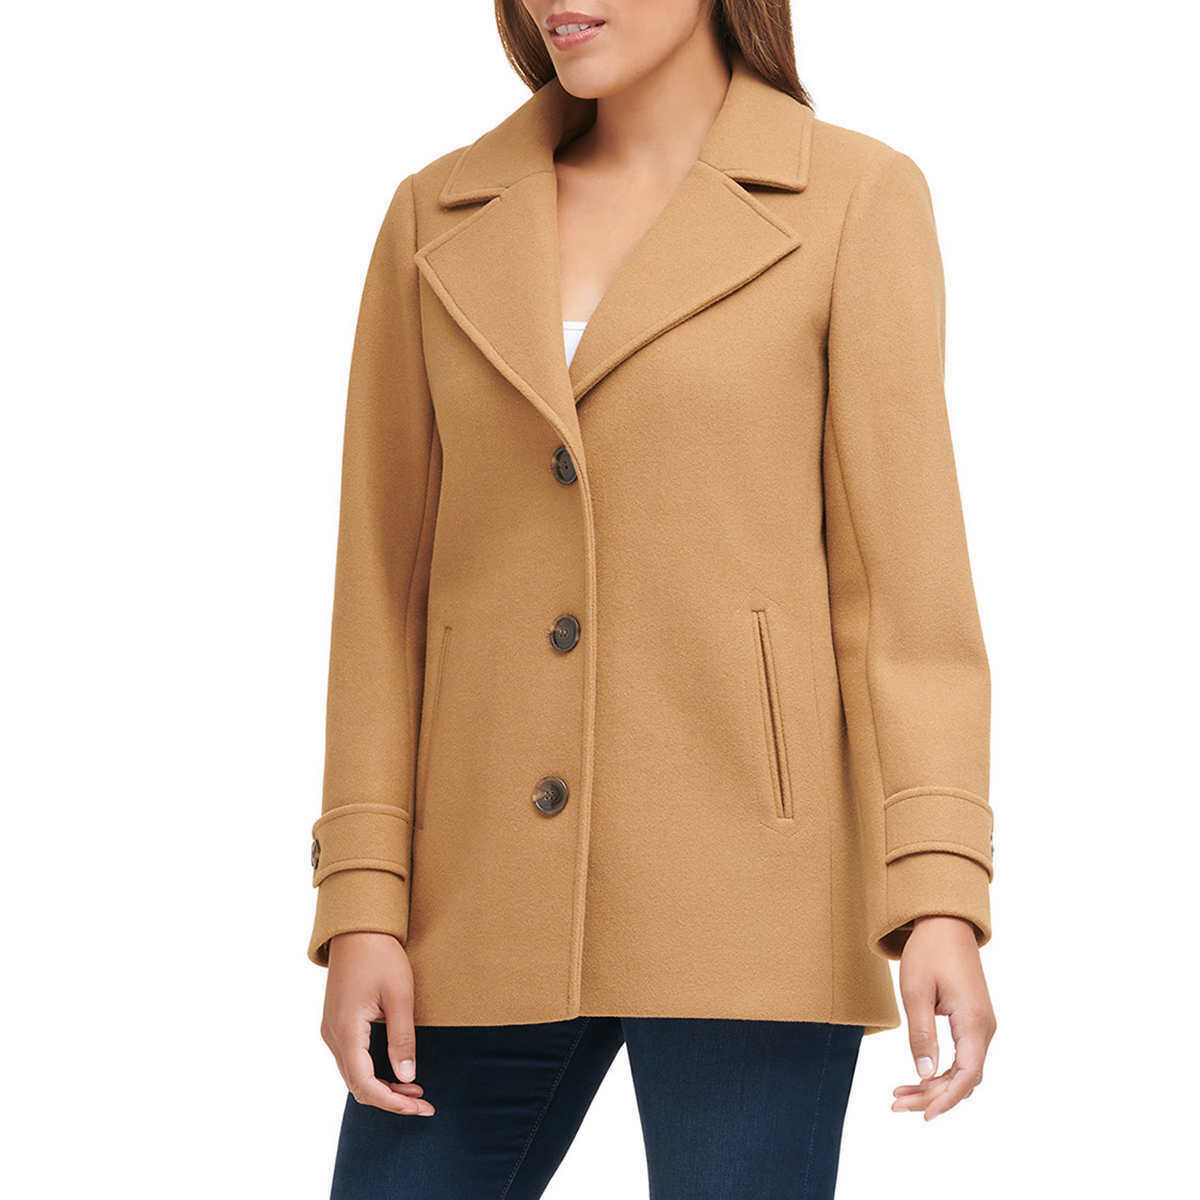 NEW Andrew Marc Ladies' Peacoat Select Size-Color **FREE SHIPPING**